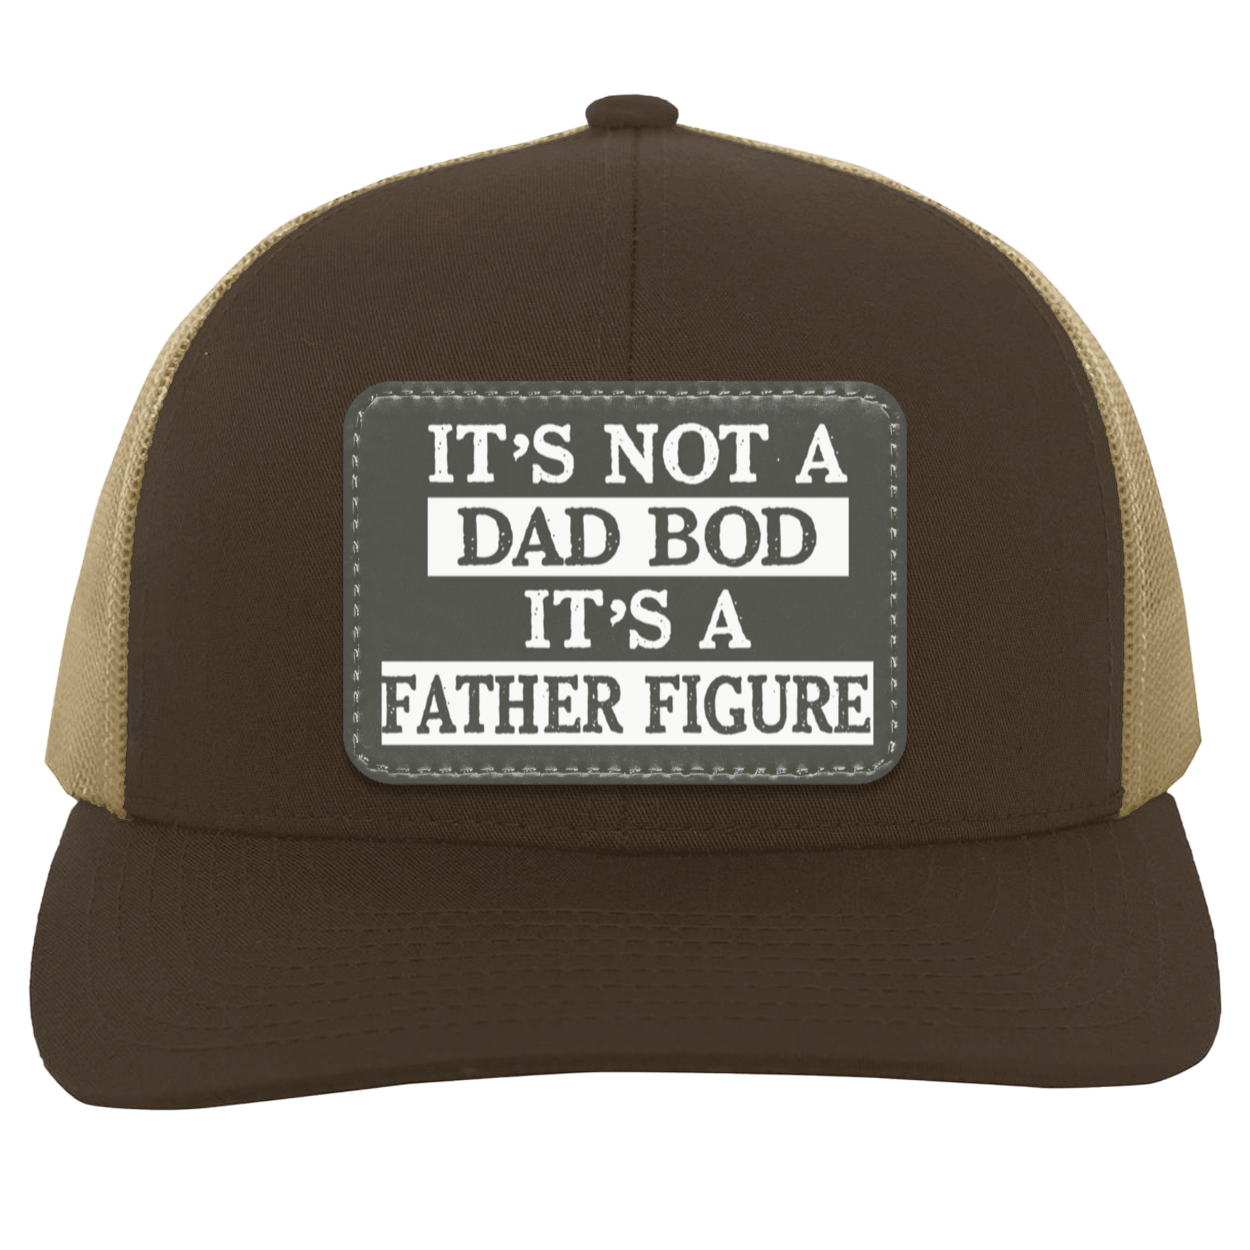 It's Not A Dad Bod Leather Patch Hat